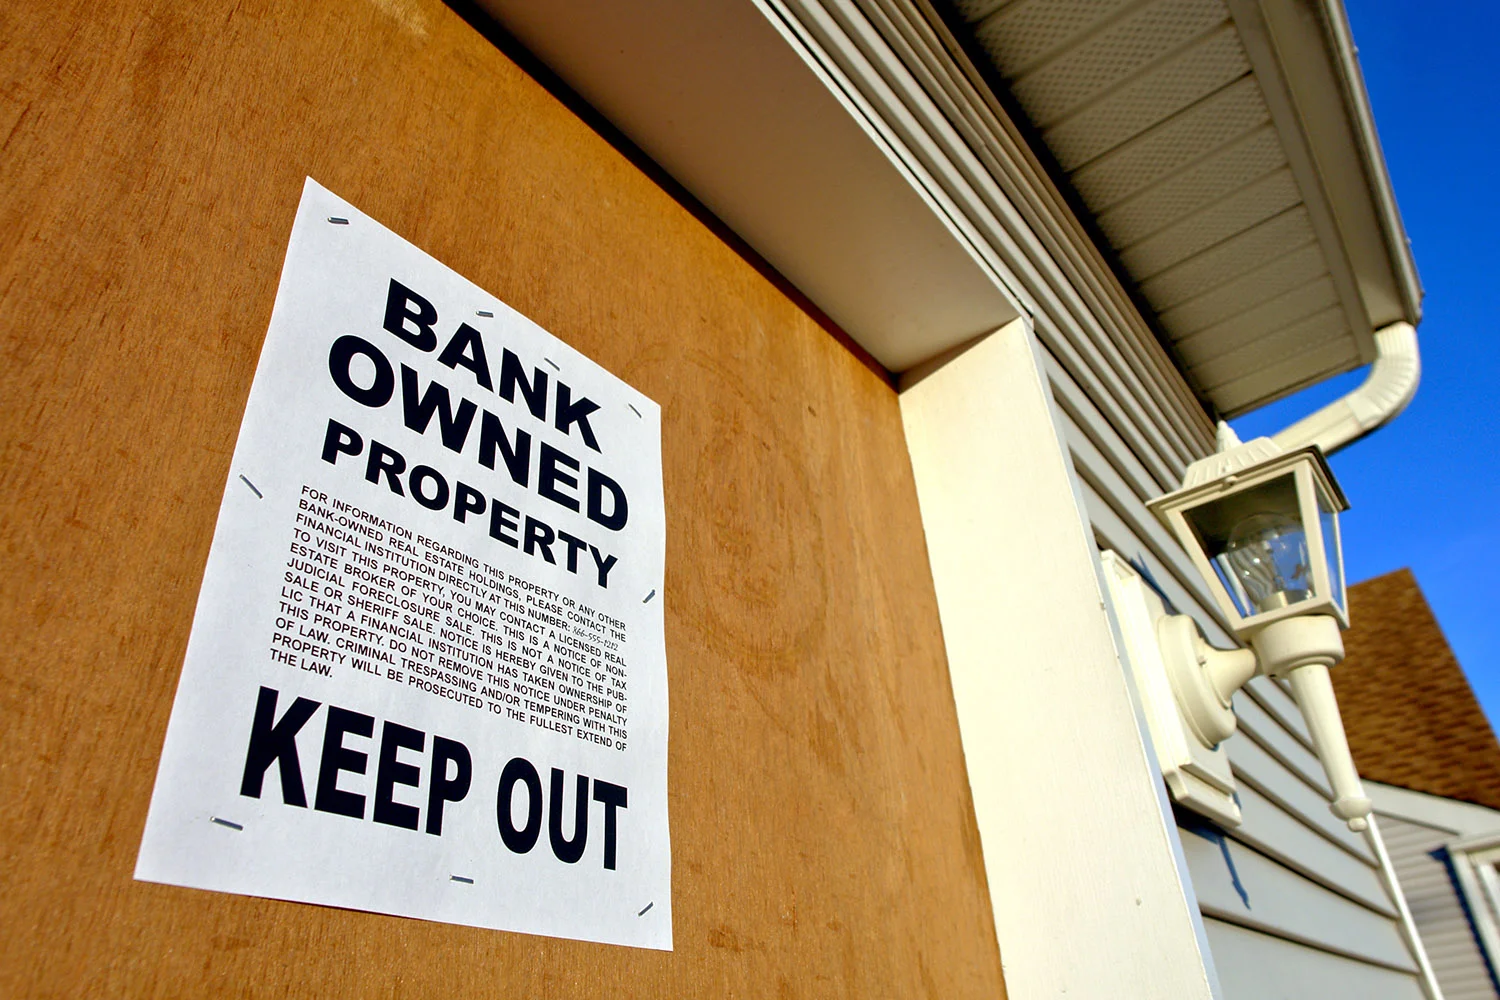 Real estate lender bank owned keep out sign notice posted on a boarded up house